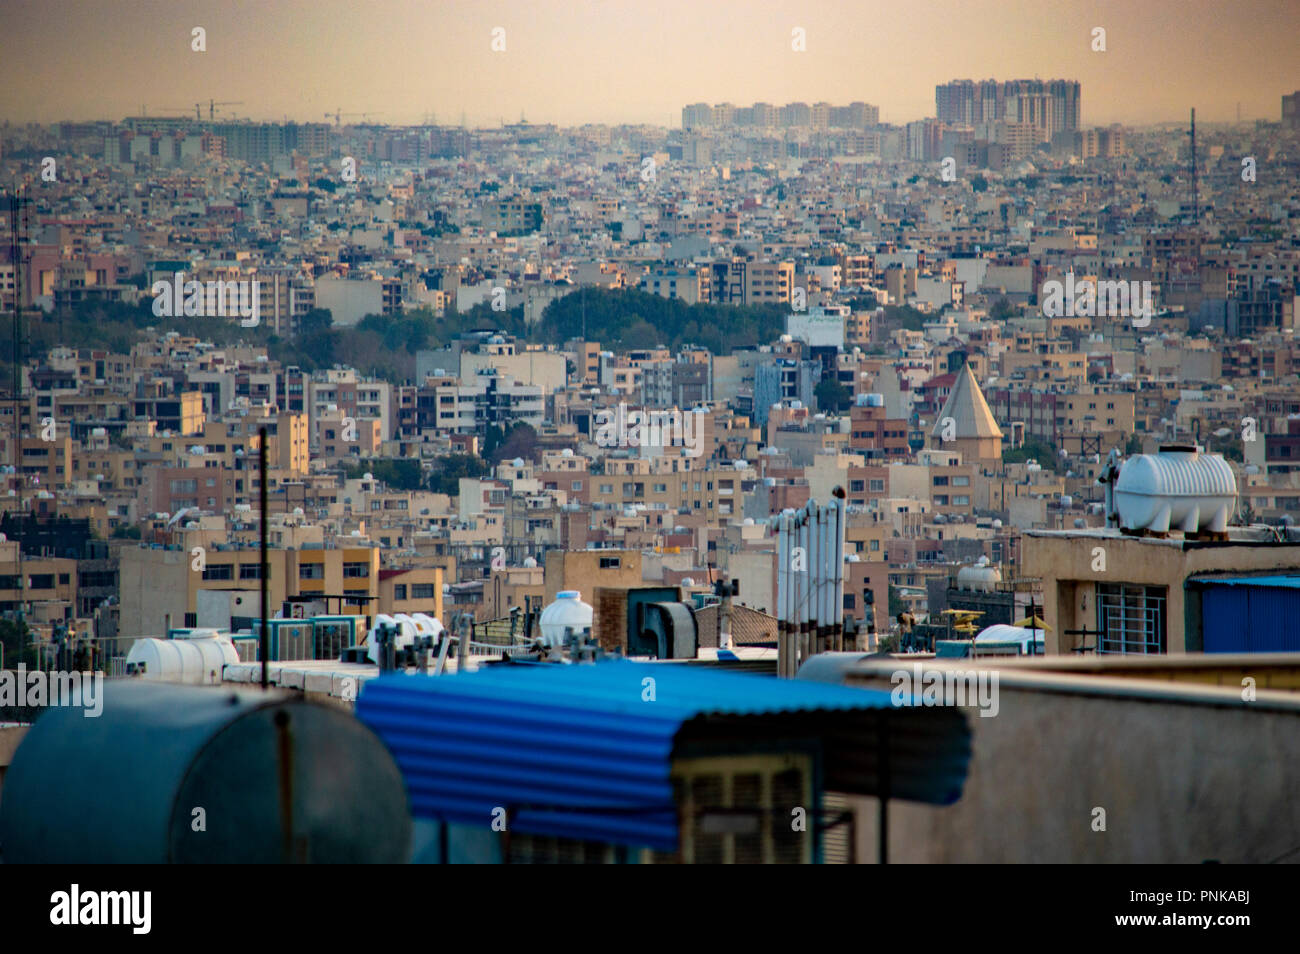 A view of Esfahan, Iran Stock Photo